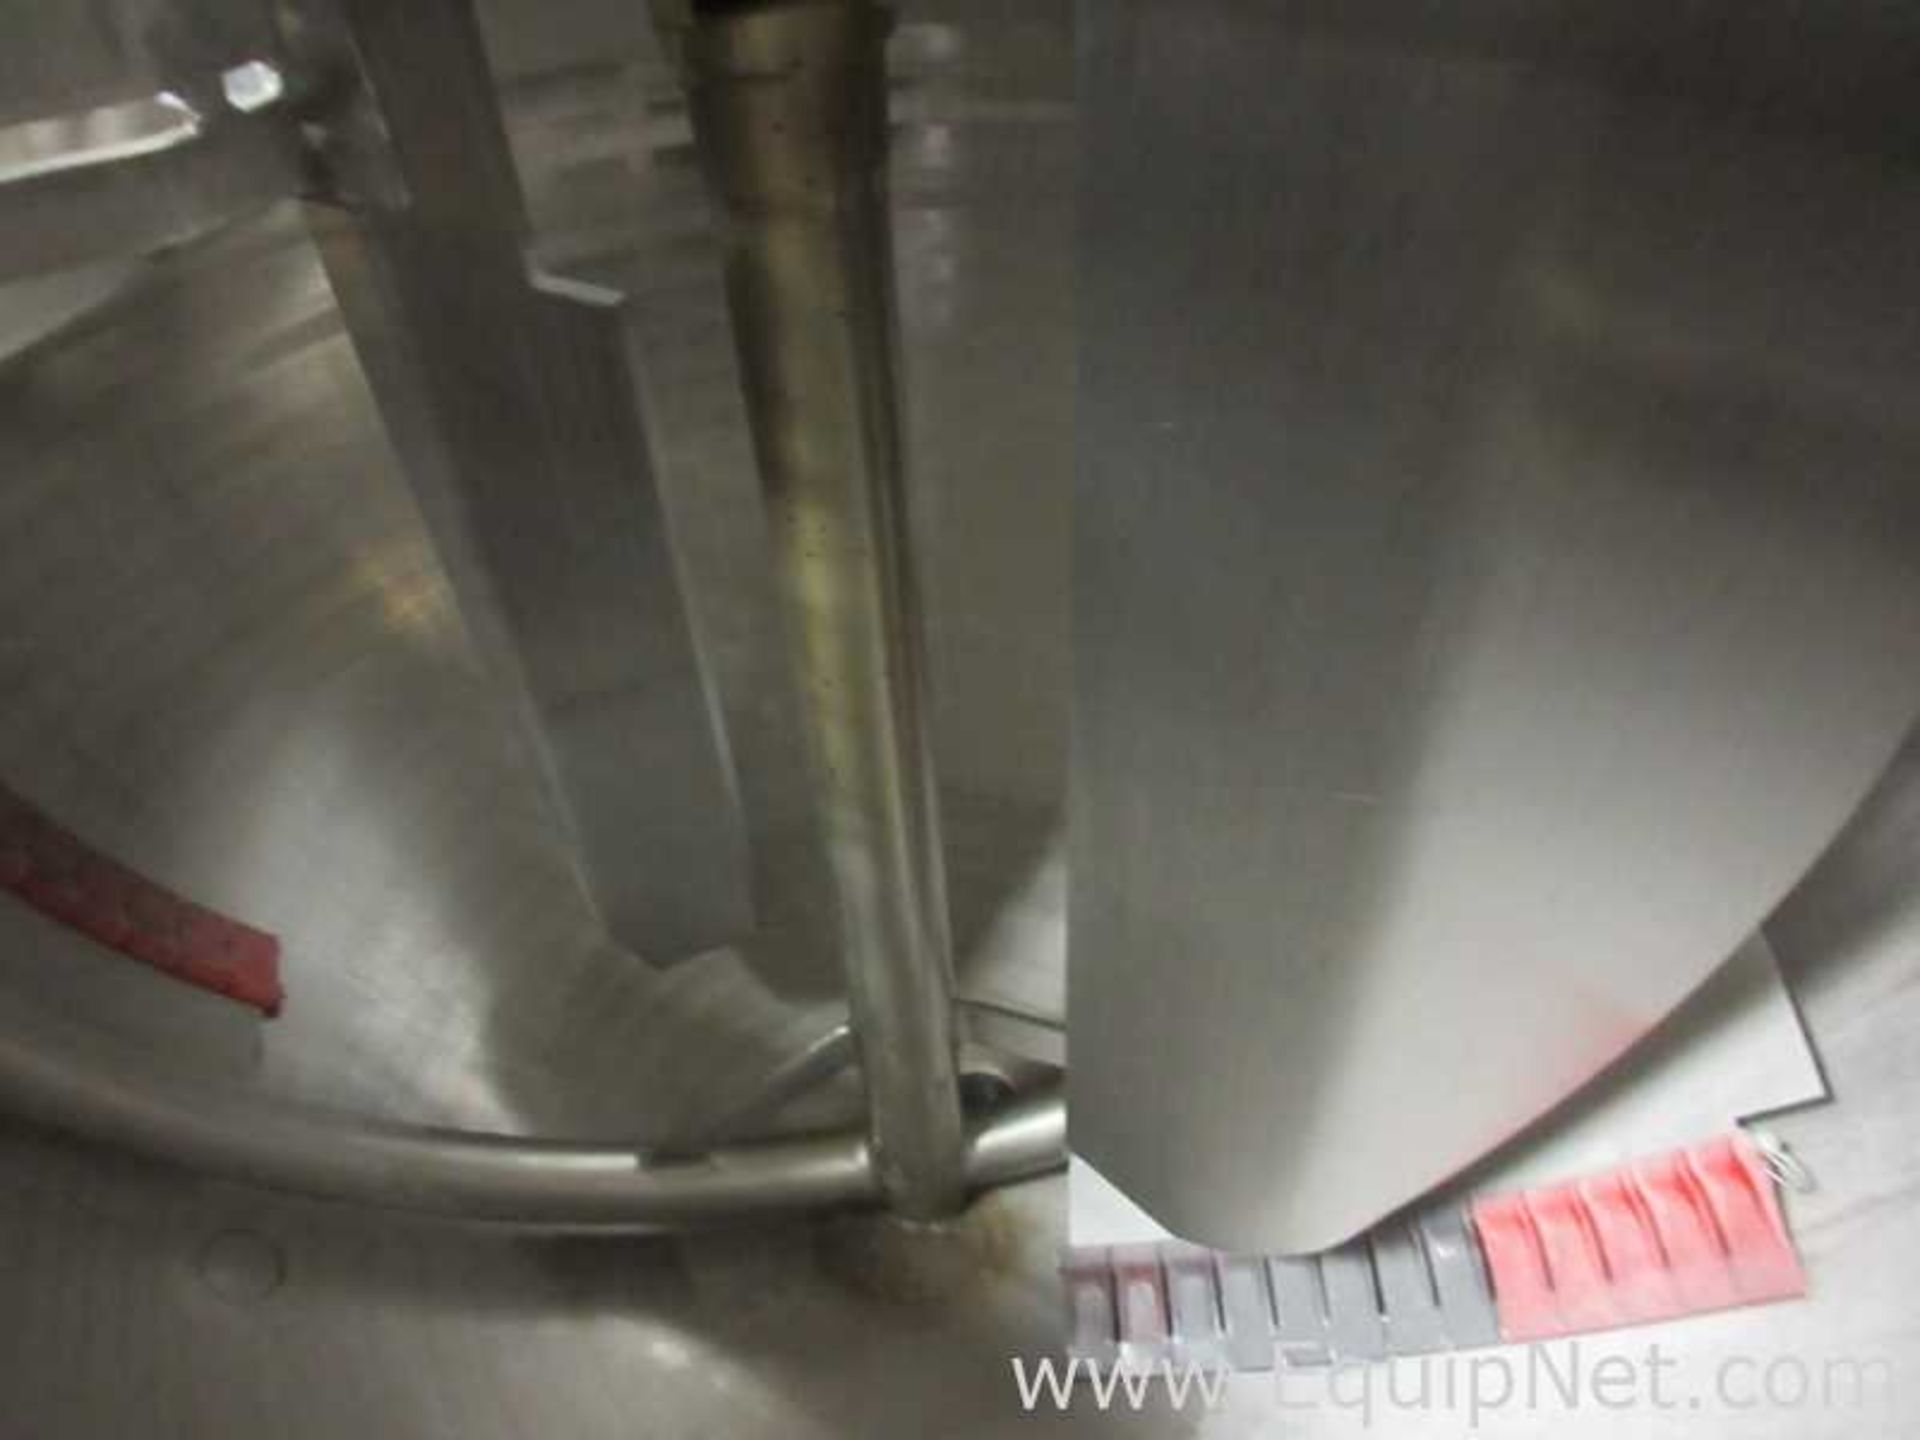 250 Gallon Lee Jacketed Sanitary Stainless Steel Kettle With Sweep Agitator - Image 4 of 6